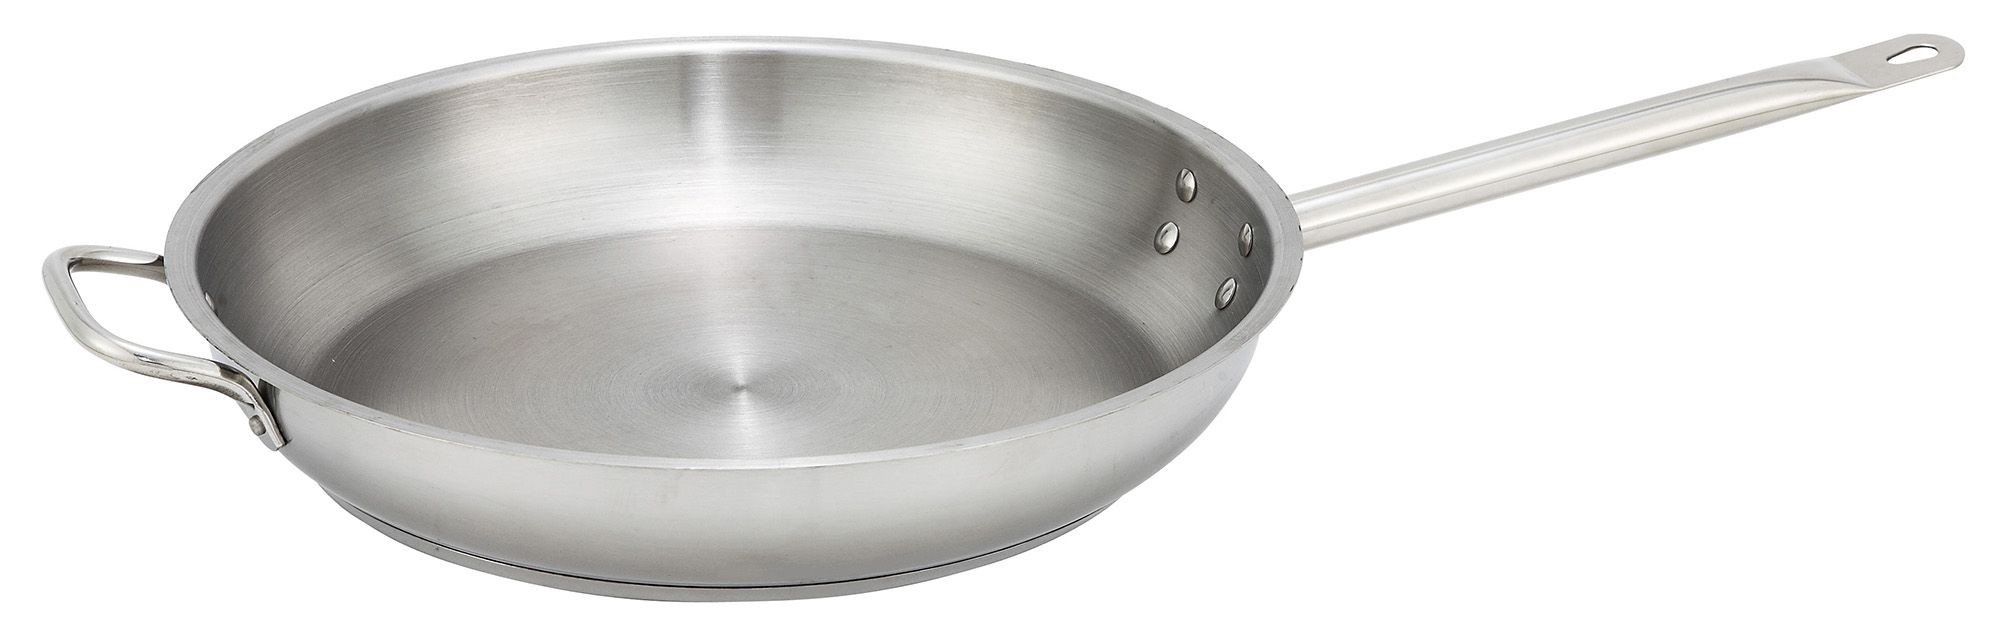 Winco SSFP-12 Stainless Steel Induction Fry Pan 12"